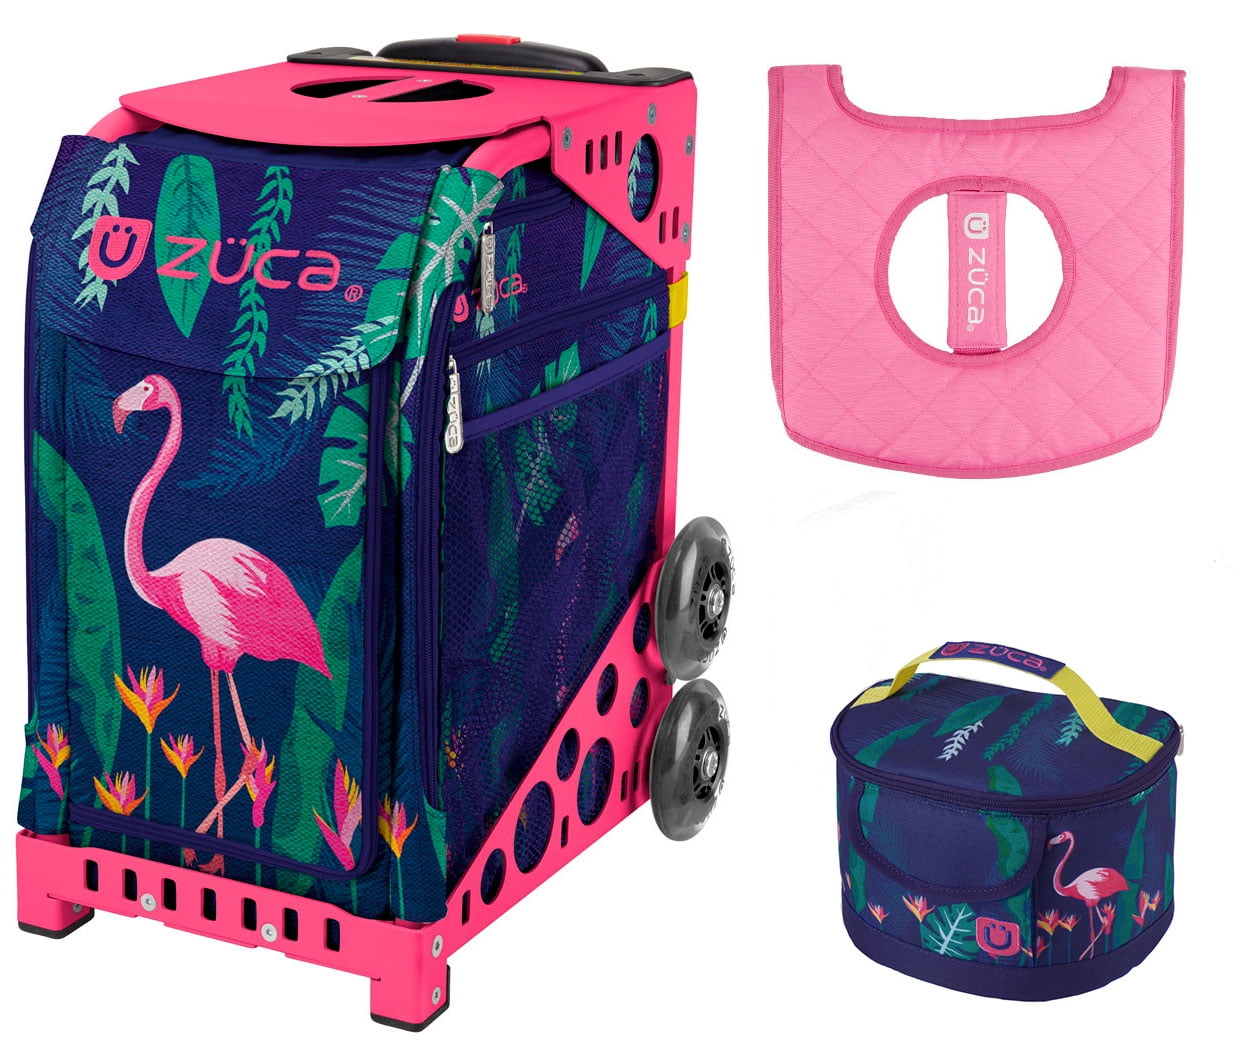 Zuca Flamingo Sport Insert Bag with Pink Frame Gift Lunchbox & Seat Cushion 